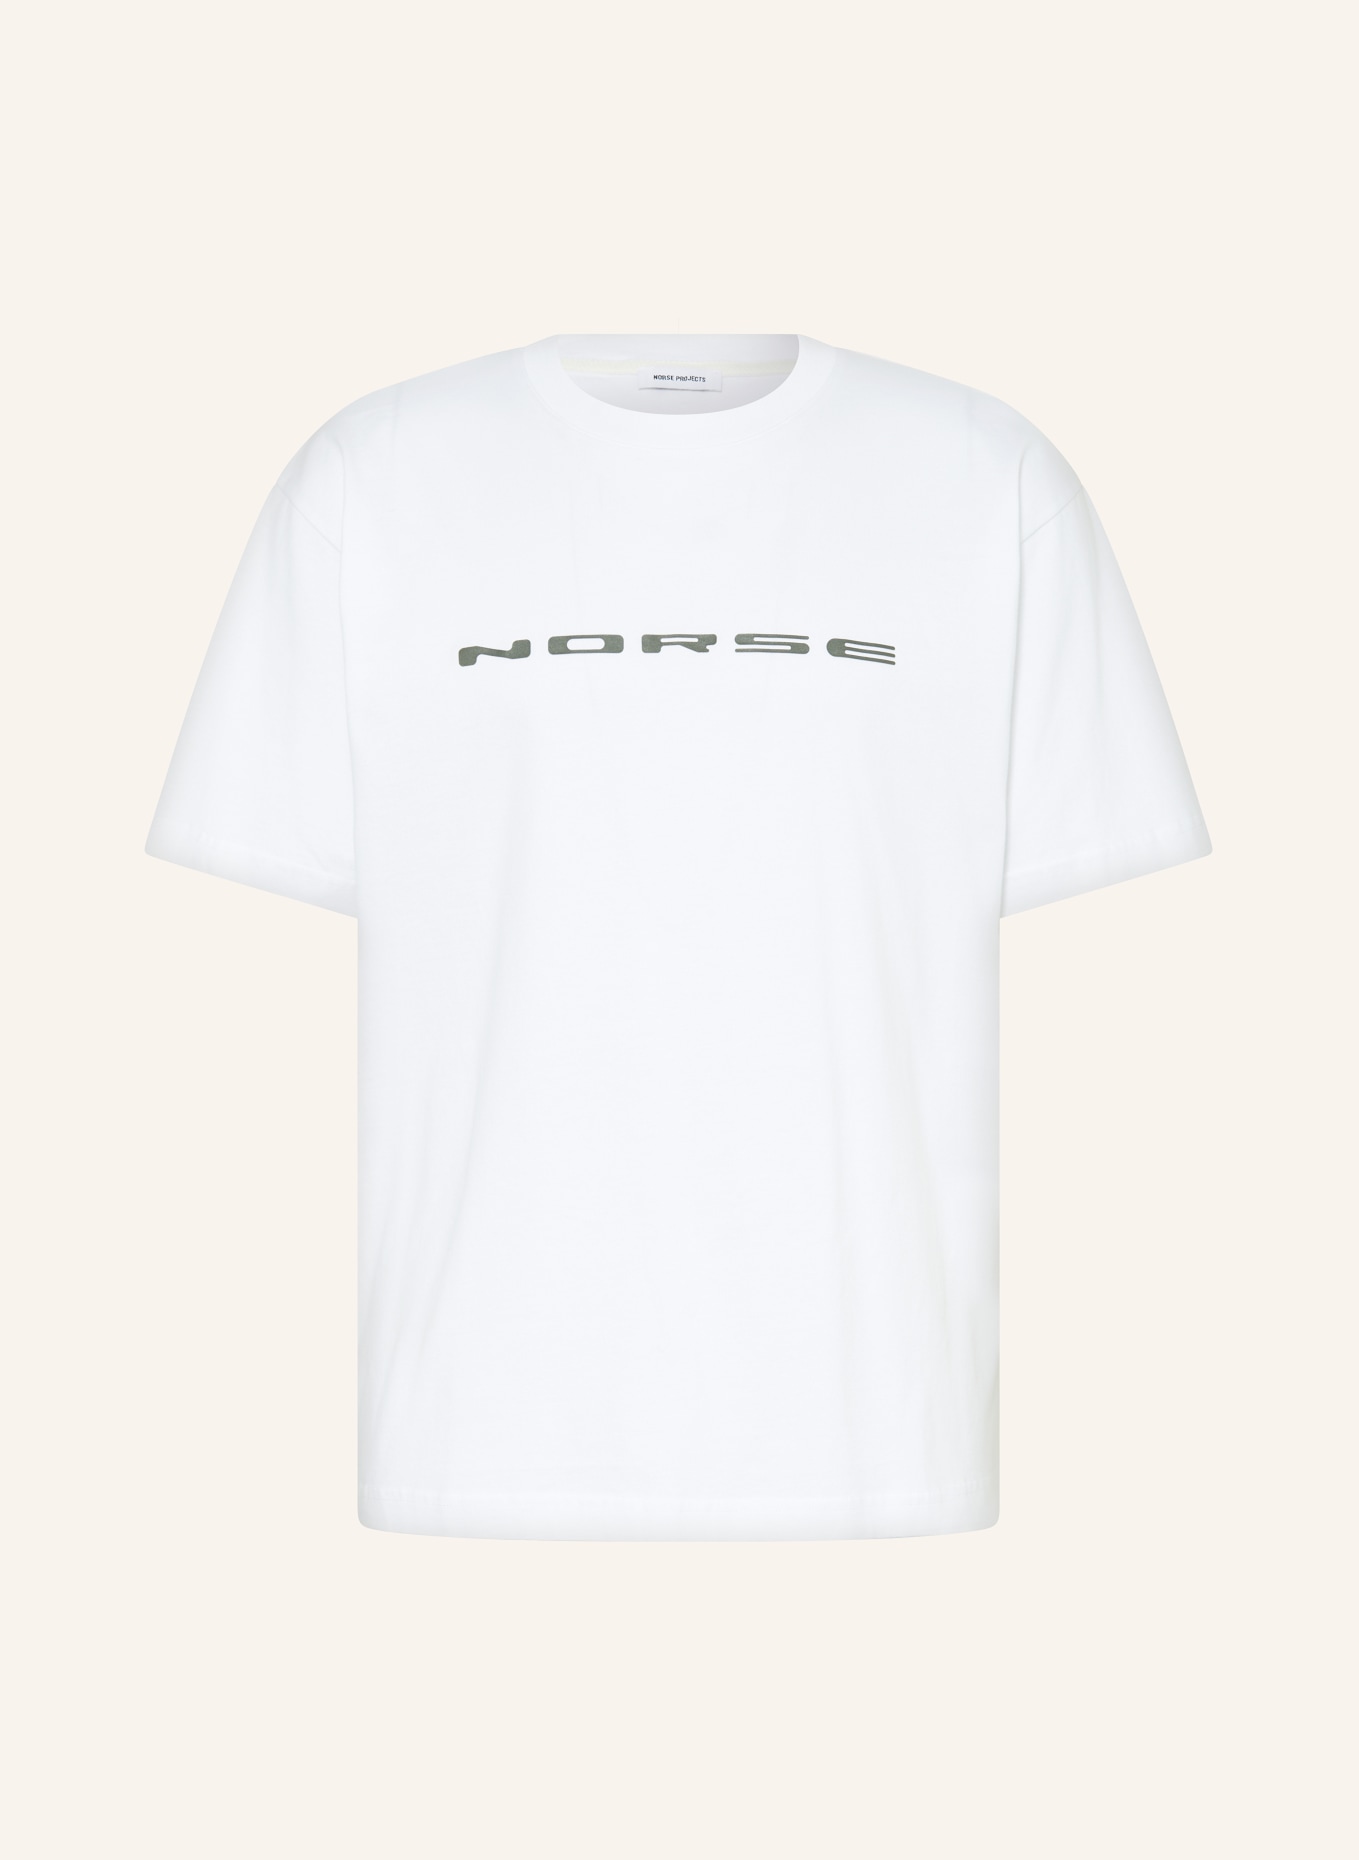 NORSE PROJECTS T-Shirt SIMON, Farbe: WEISS (Bild 1)